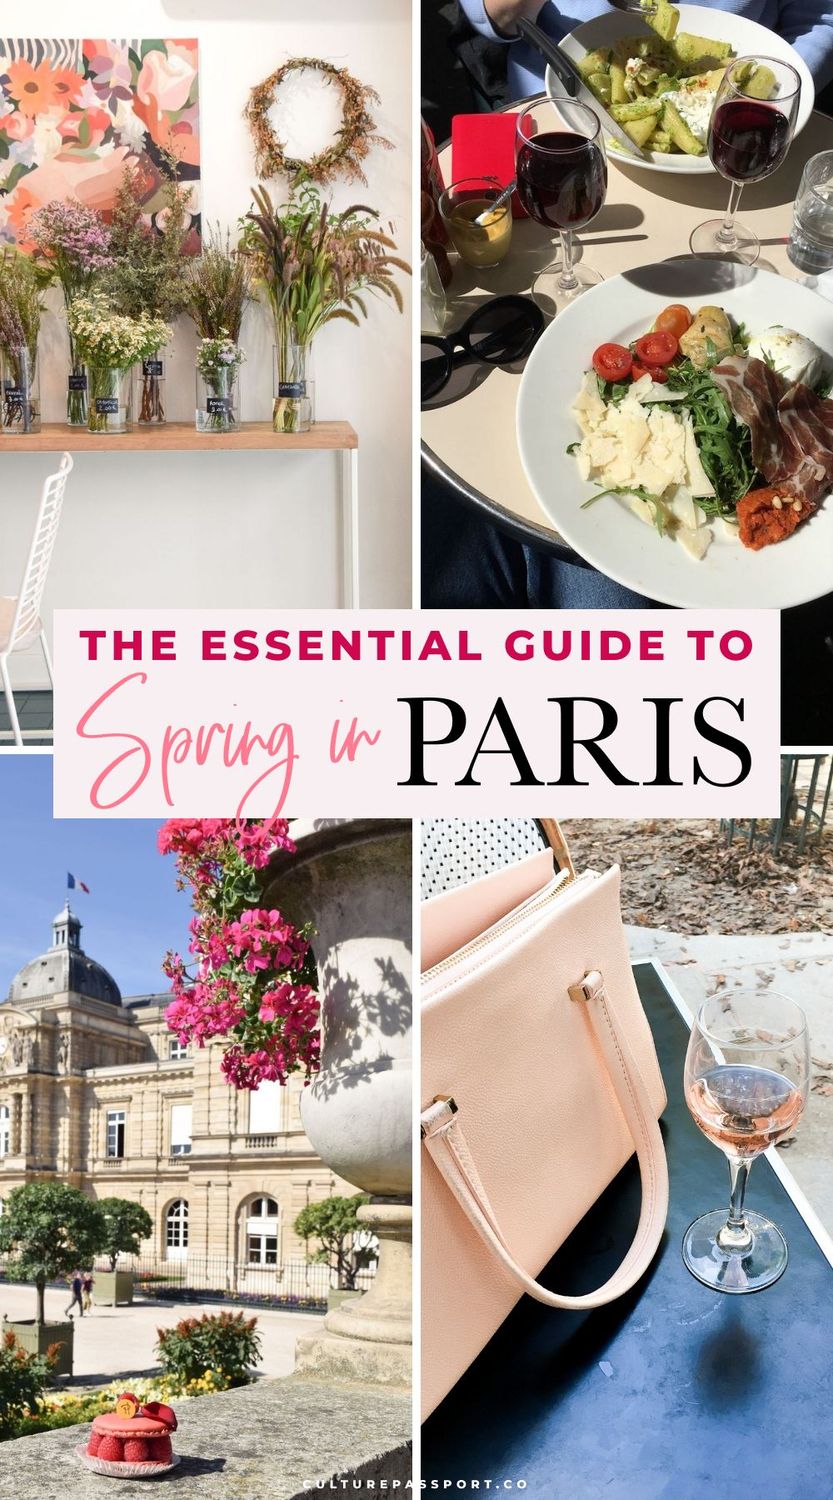 The Essential Guide to Spring in Paris! Everything you need to know before visiting Paris in spring. #parisguide #paristips #springtravel